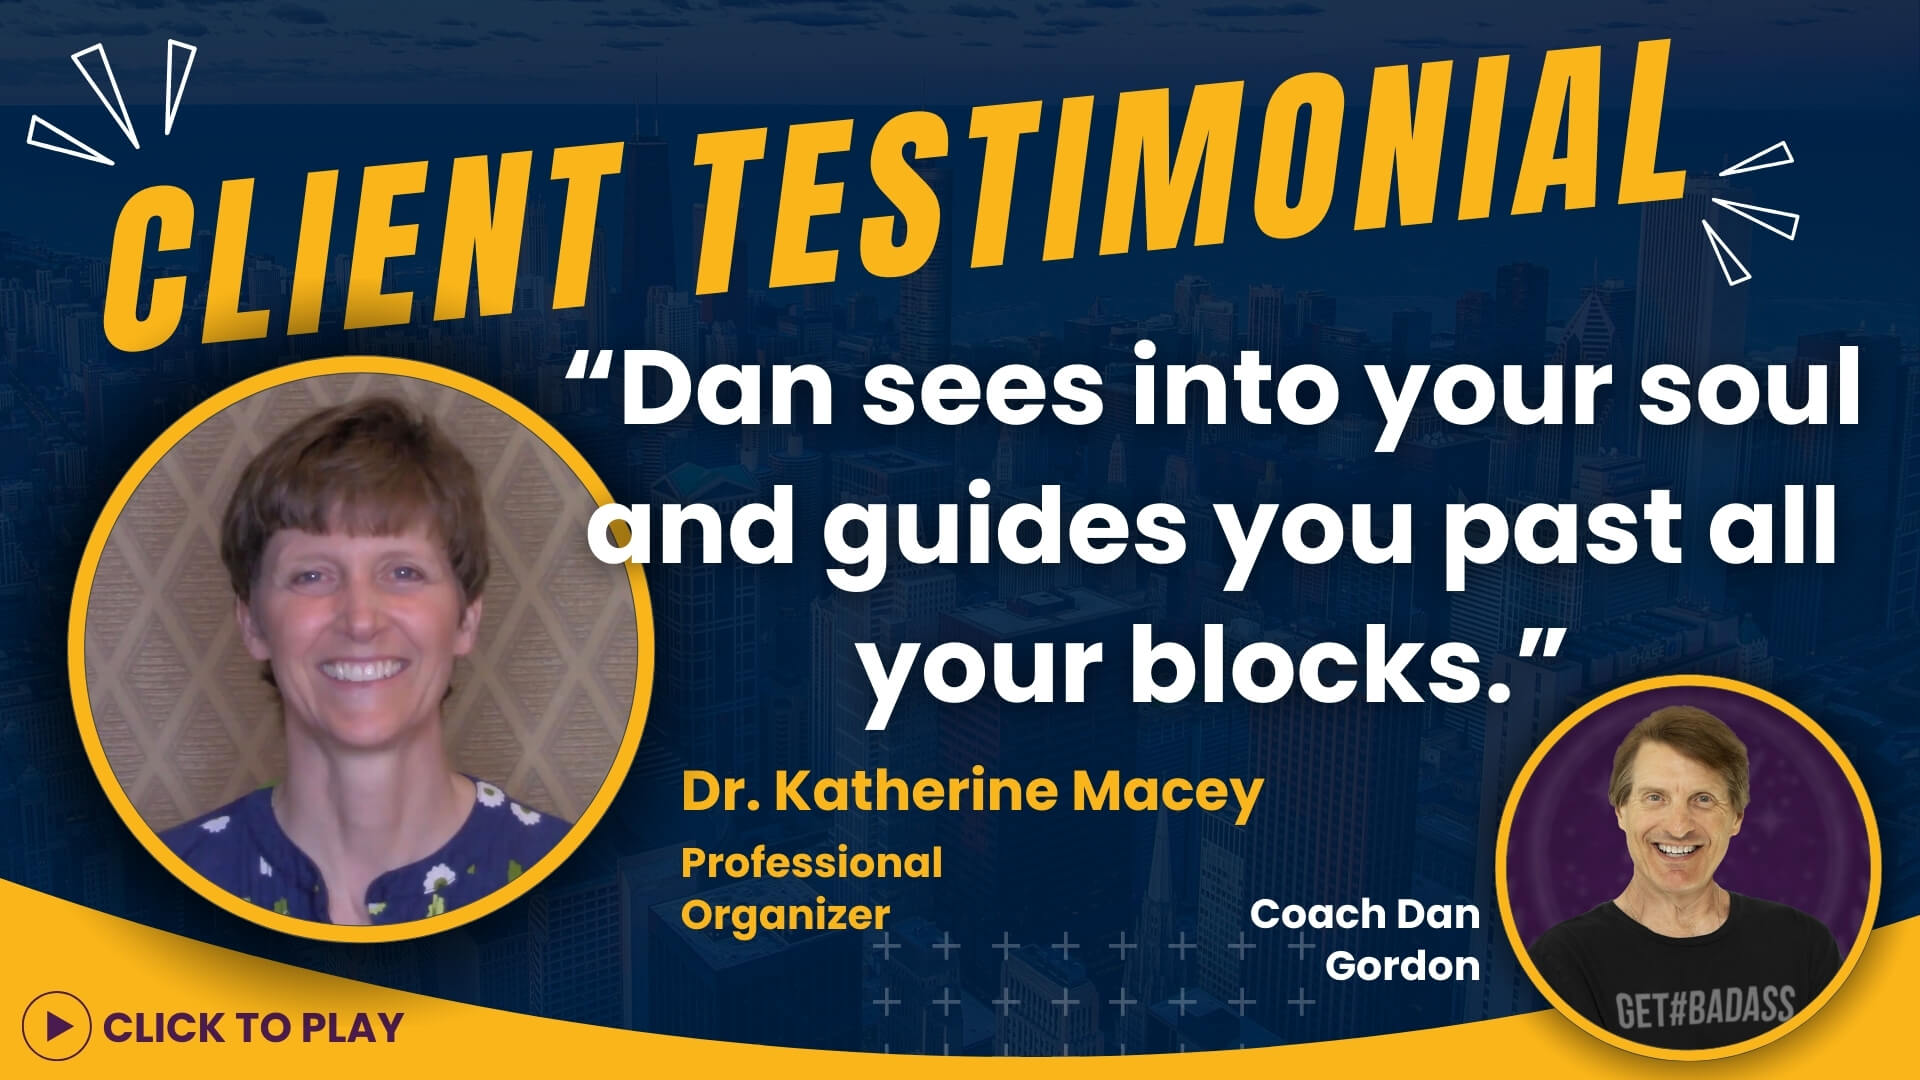 Dr. Katherine Macey, Professional Organizer, lauds Coach Dan Gordon for his insightful guidance past personal blocks, featured with a 'Click to Play' video testimony.